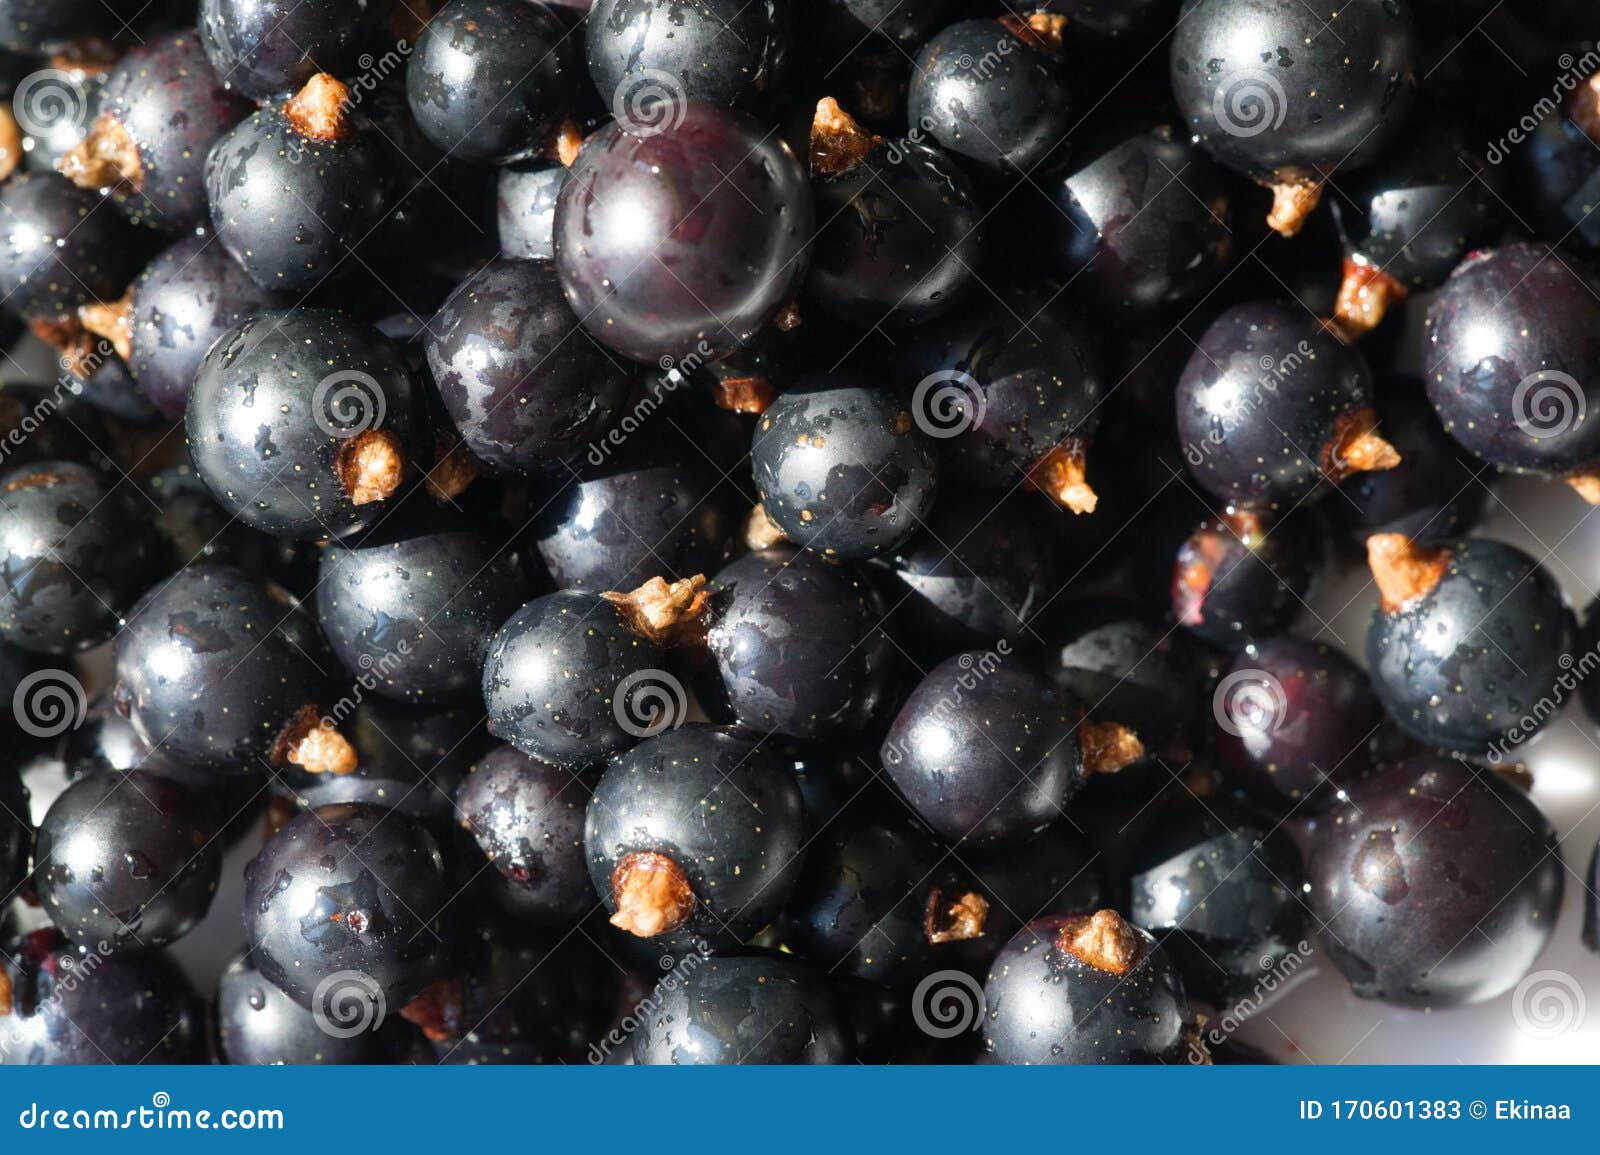 black currant, blackcurrant, blackberry. vitamin c and polyphenol phytochemicals.  they are used to make jams, jellies and syrups